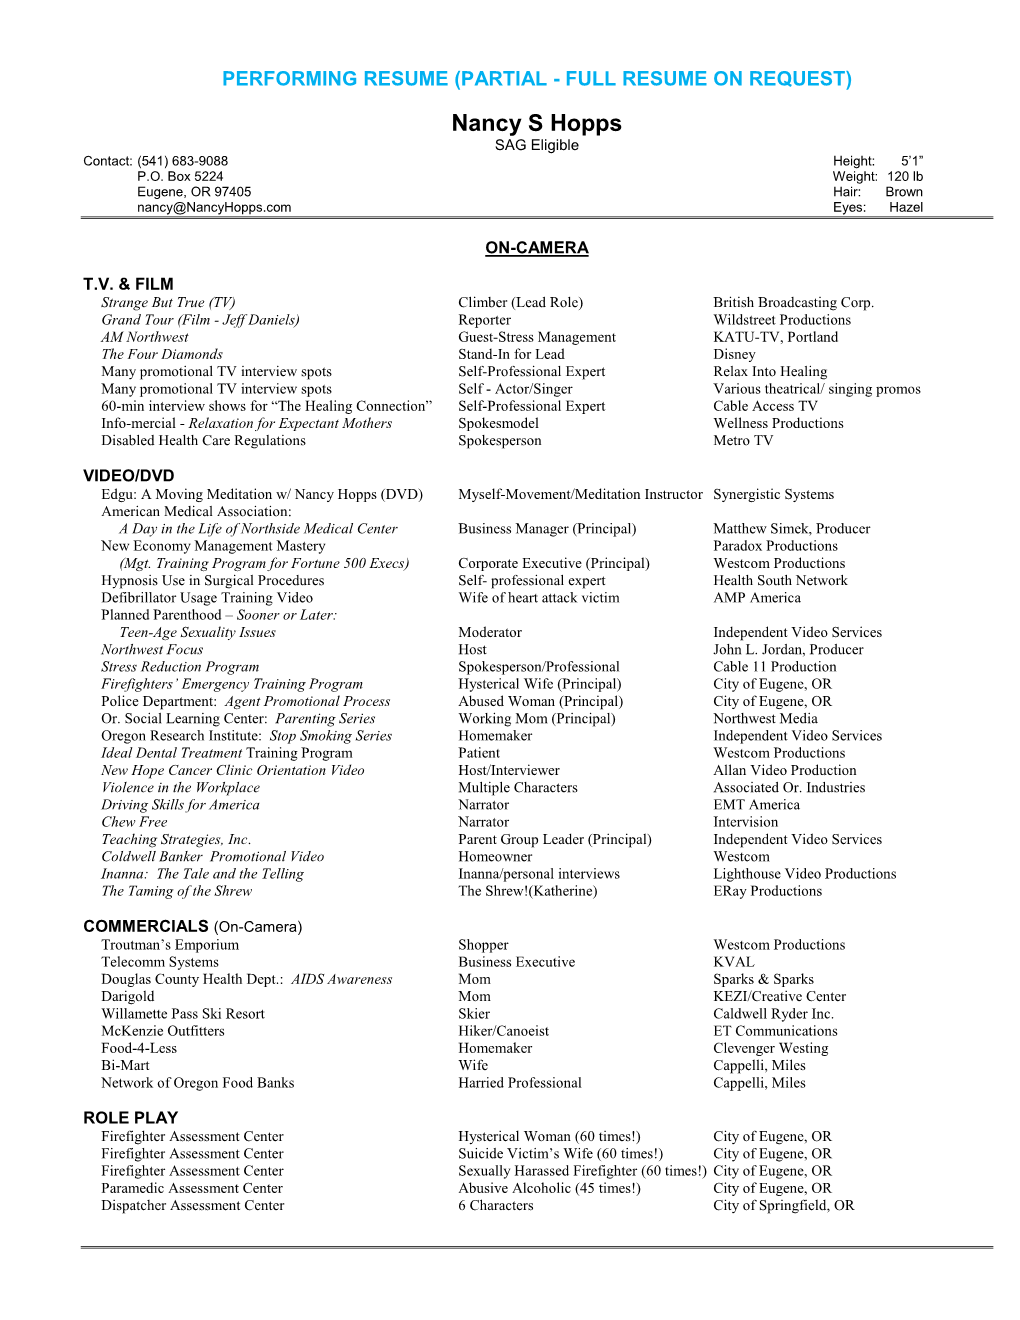 Partial - Full Resume on Request)